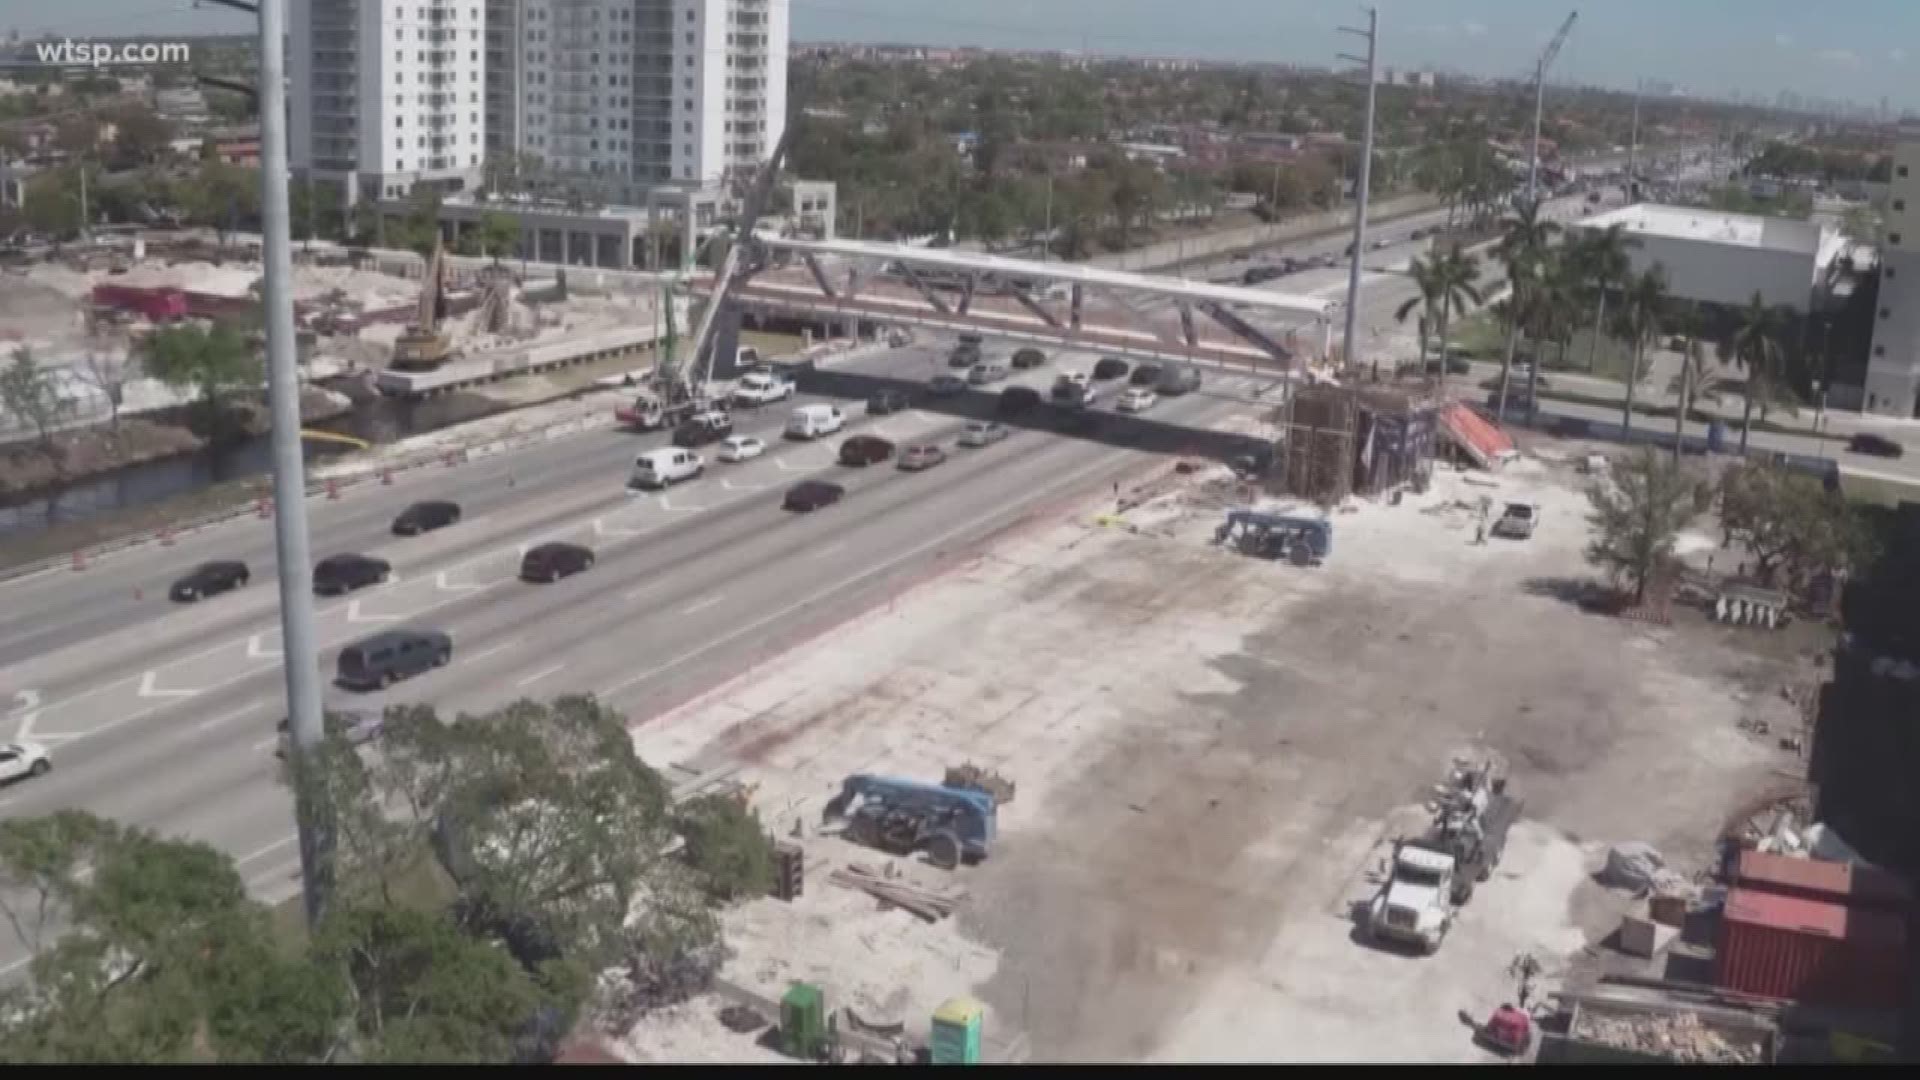 The bankrupt construction company that built a Florida International University pedestrian bridge that collapsed has reached a deal with its insurers to pay up to $42 million to the victims and their families.